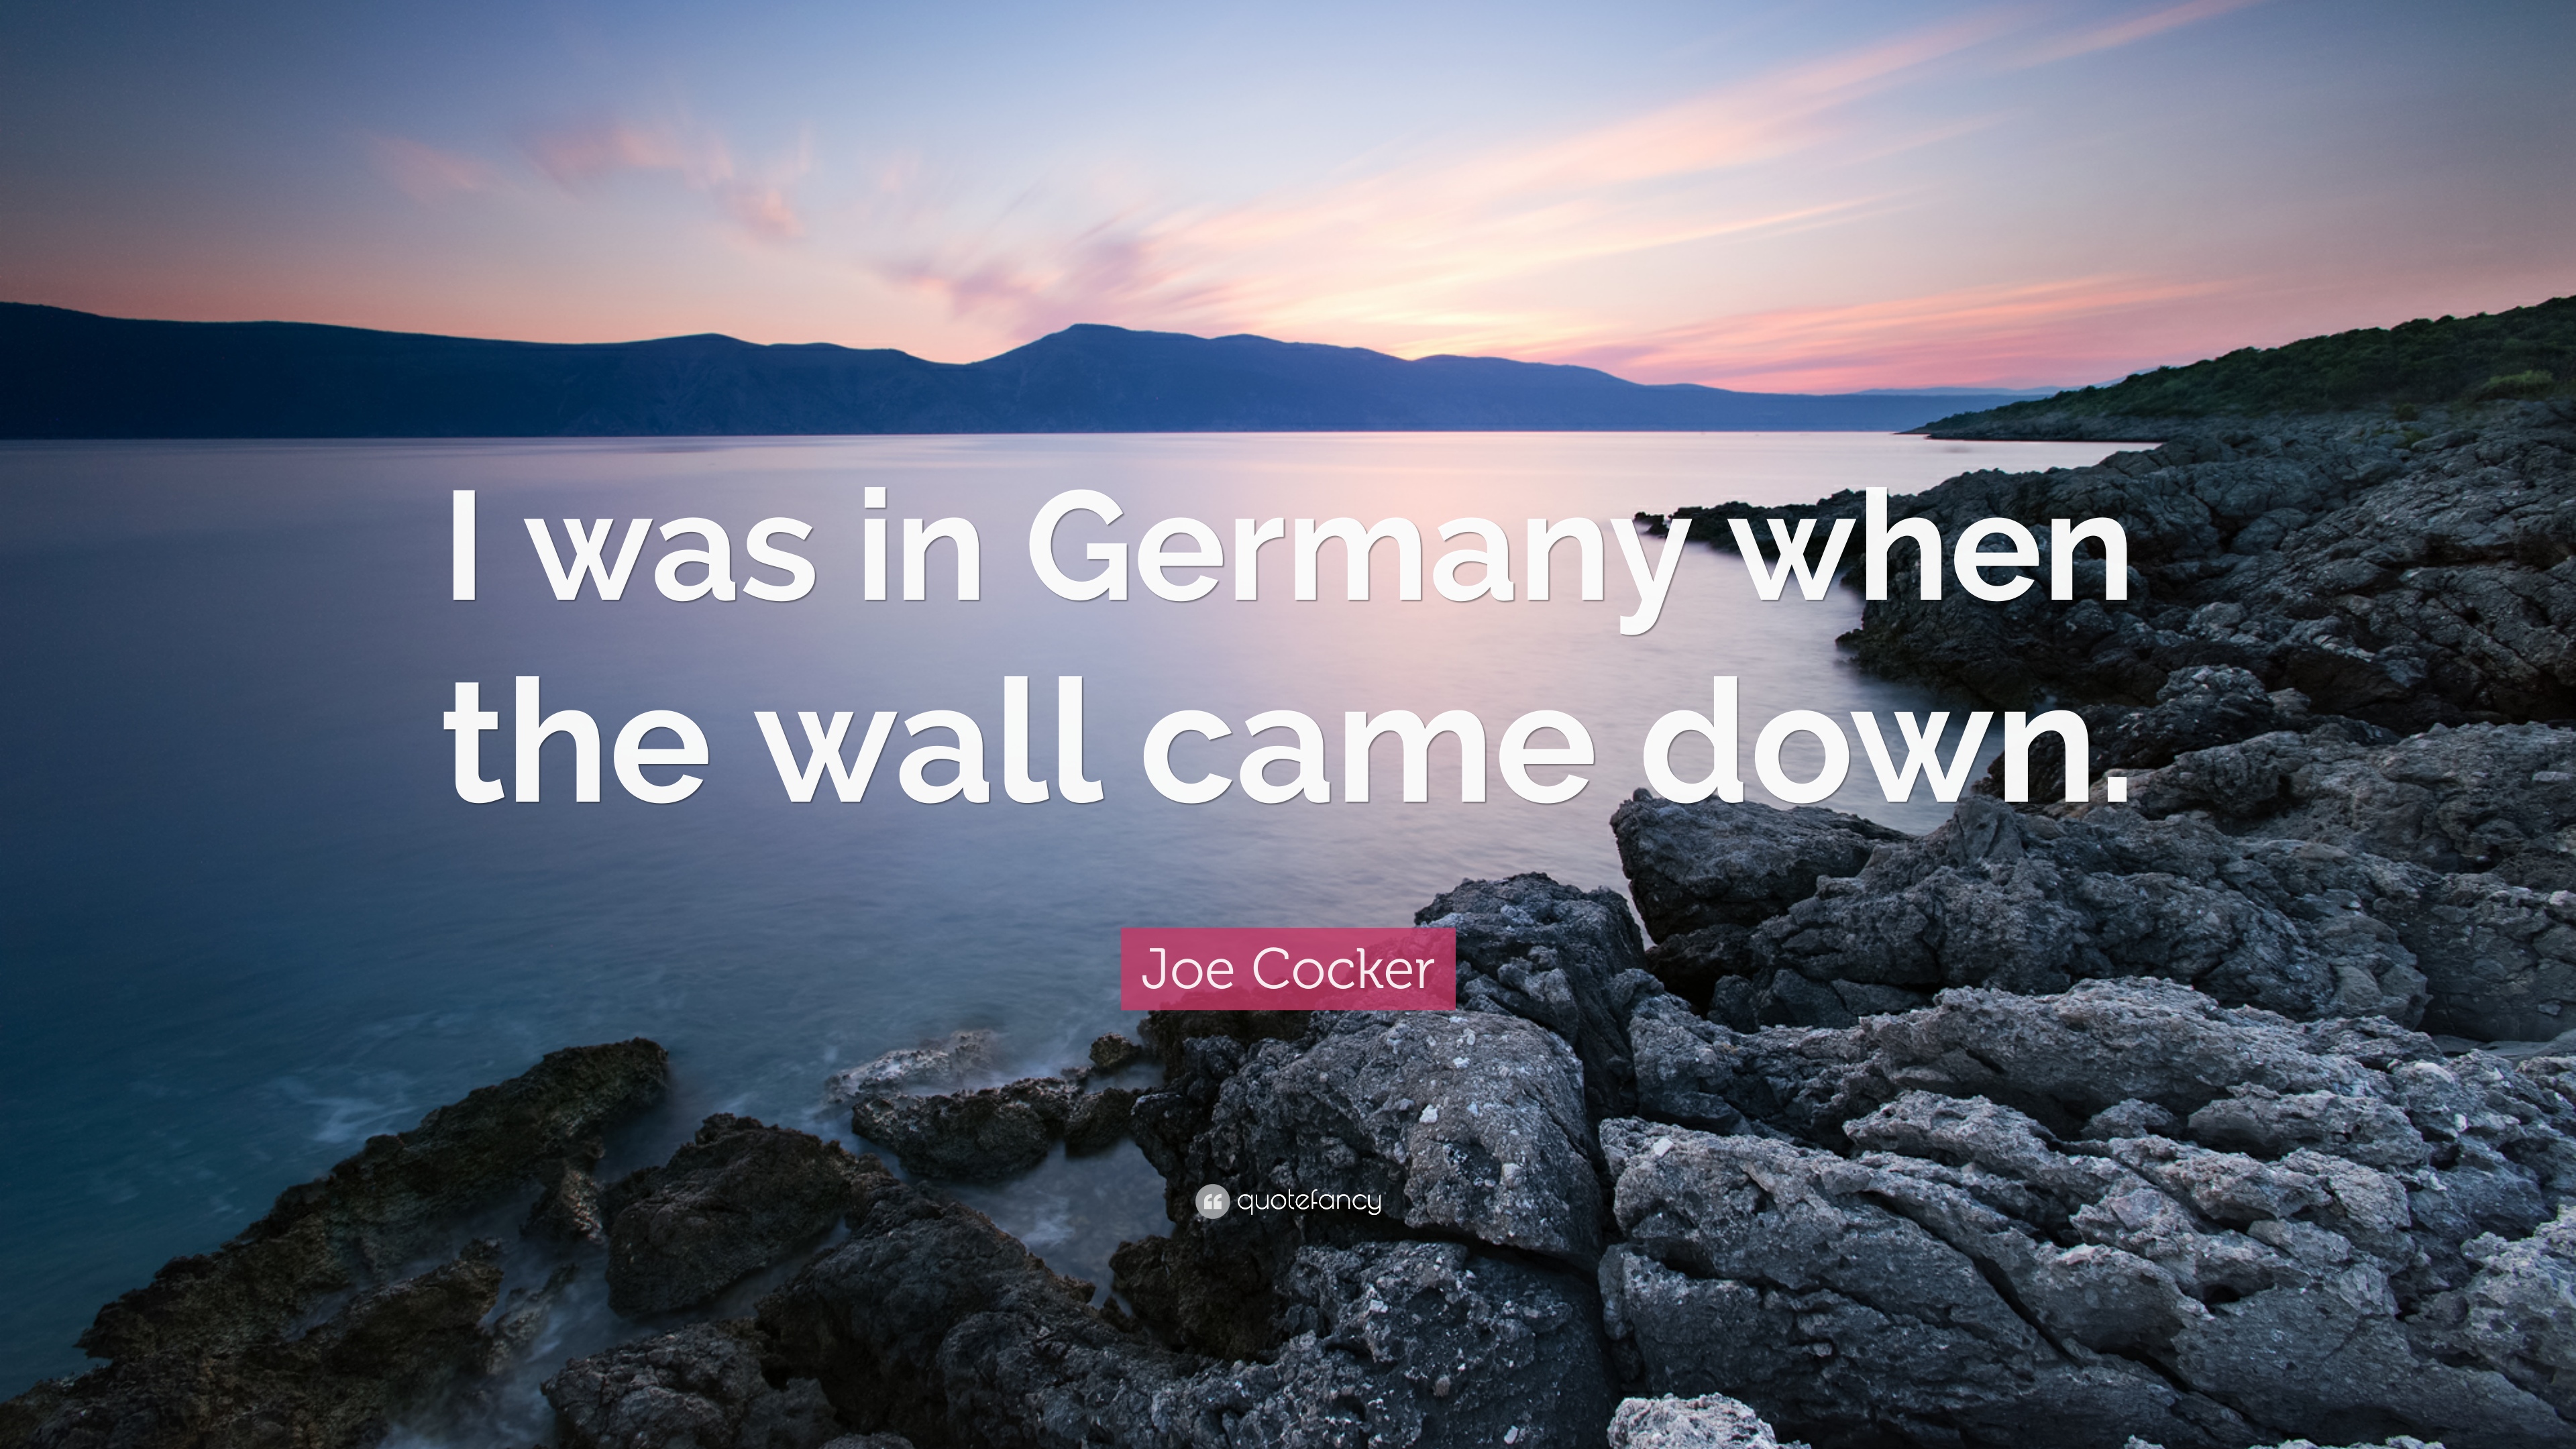 Joe Cocker Quote: “I was in Germany when the wall came down.” 7